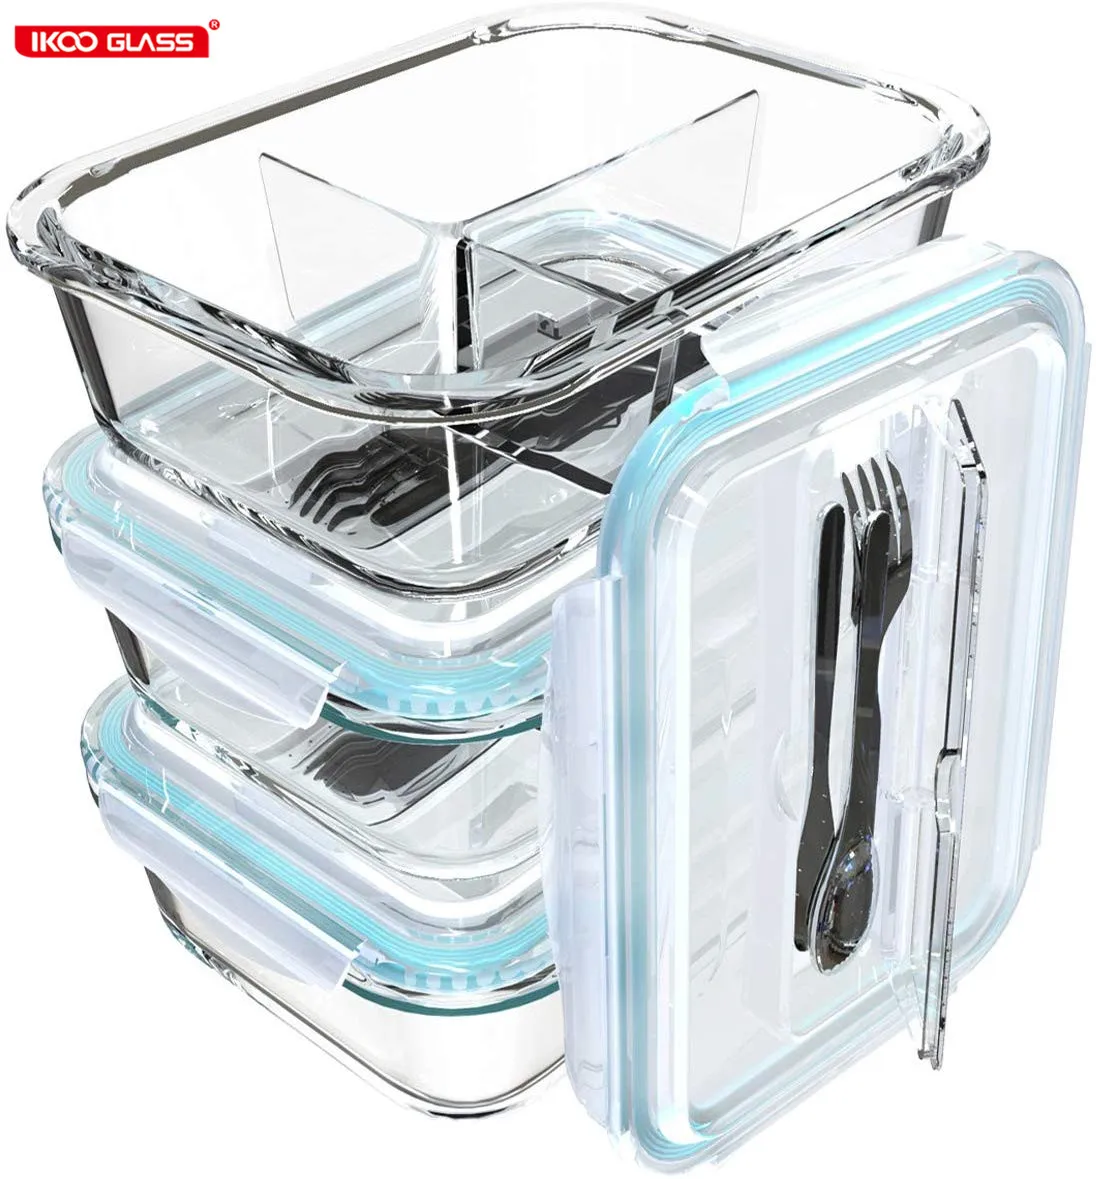 Glass Meal Prep Containers 3 Compartment Food Lunch With Lids